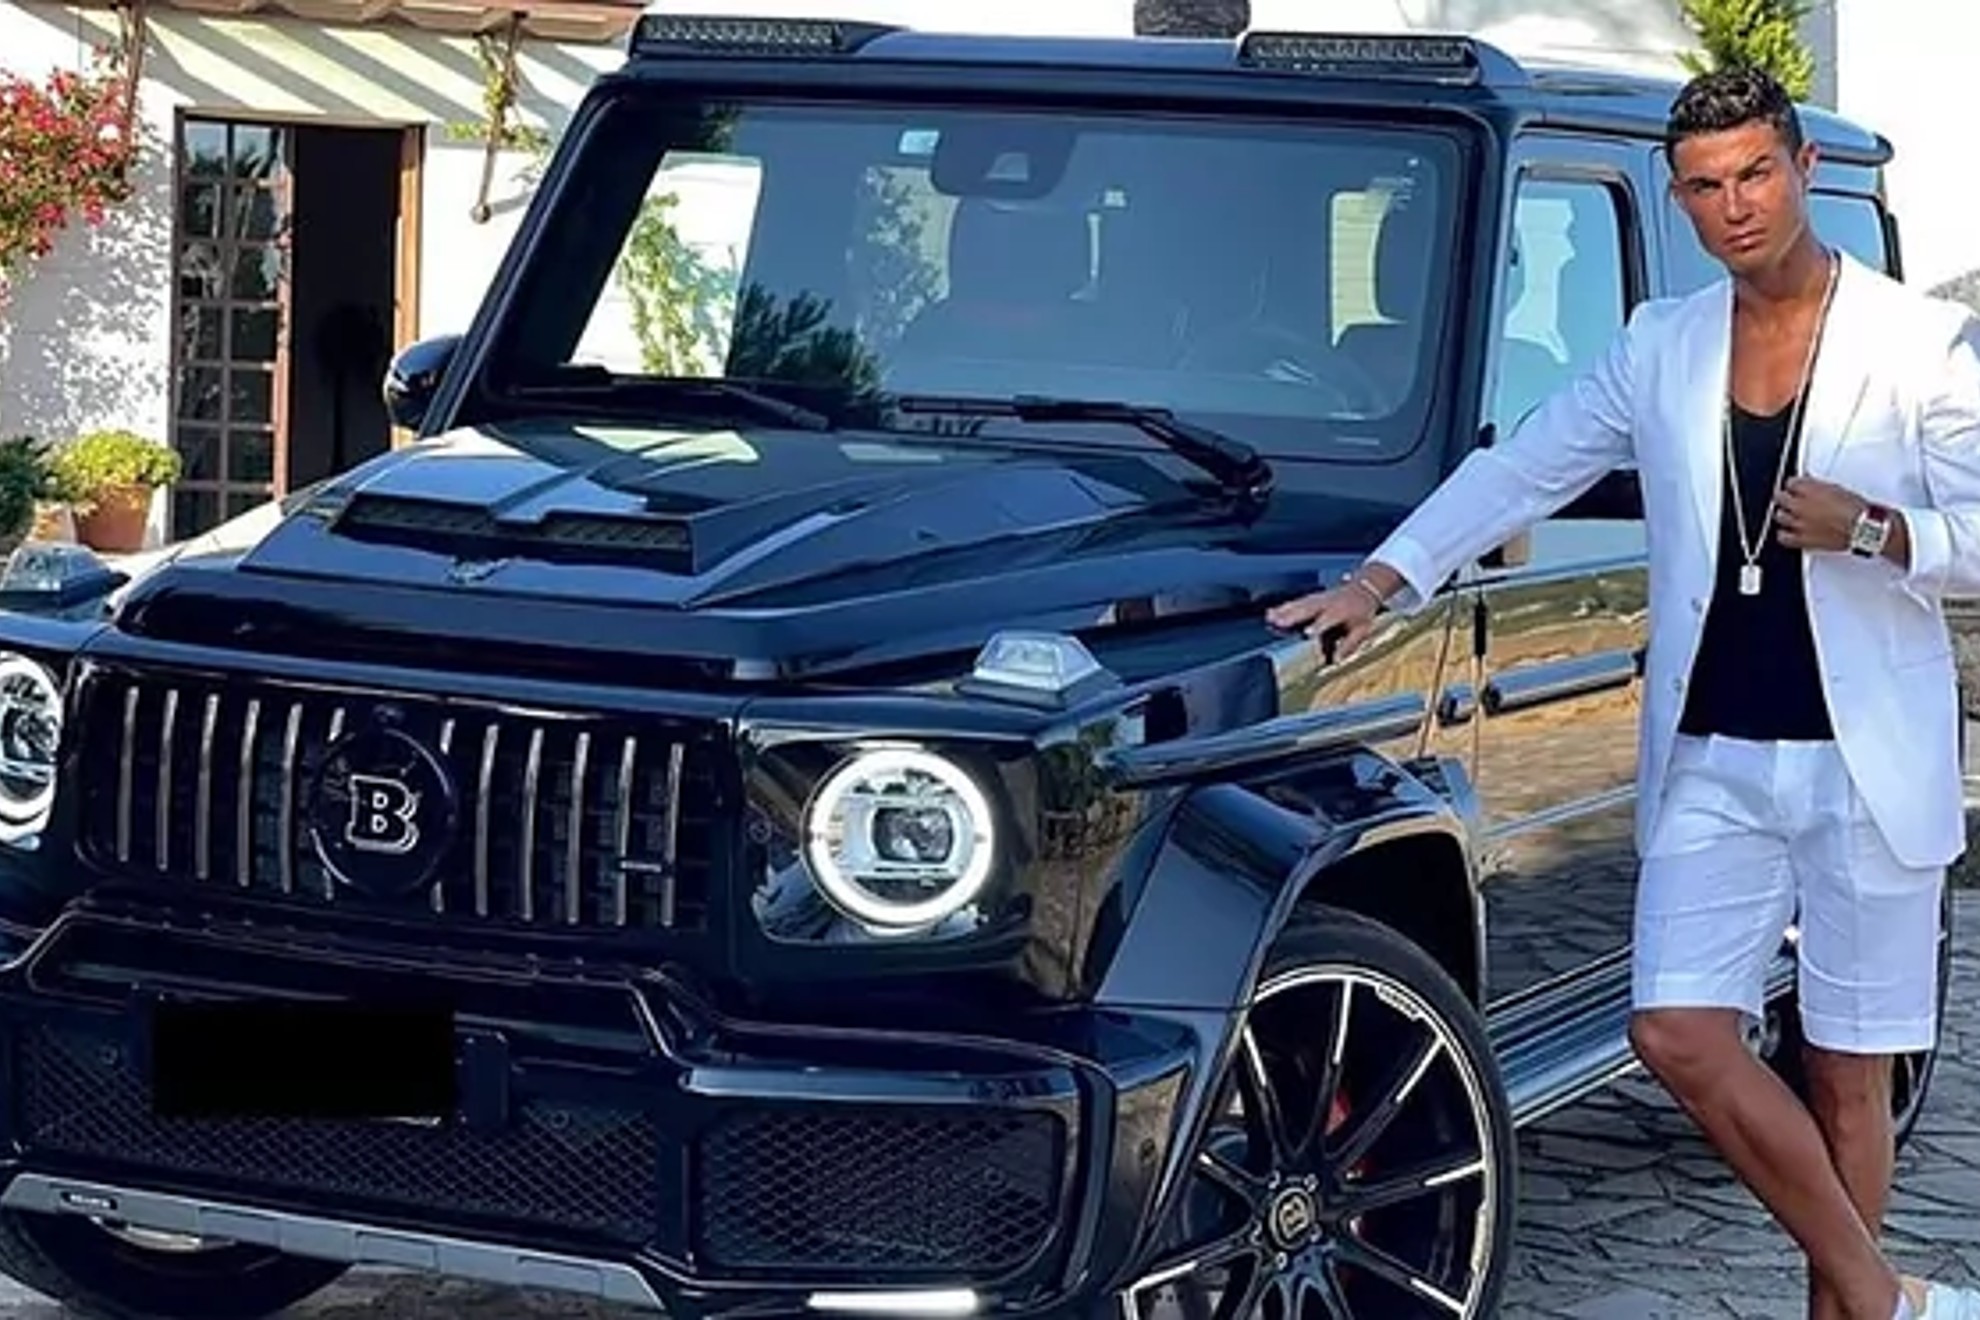 Cristiano Ronaldo won't return to England... because his luxury cars already packed up